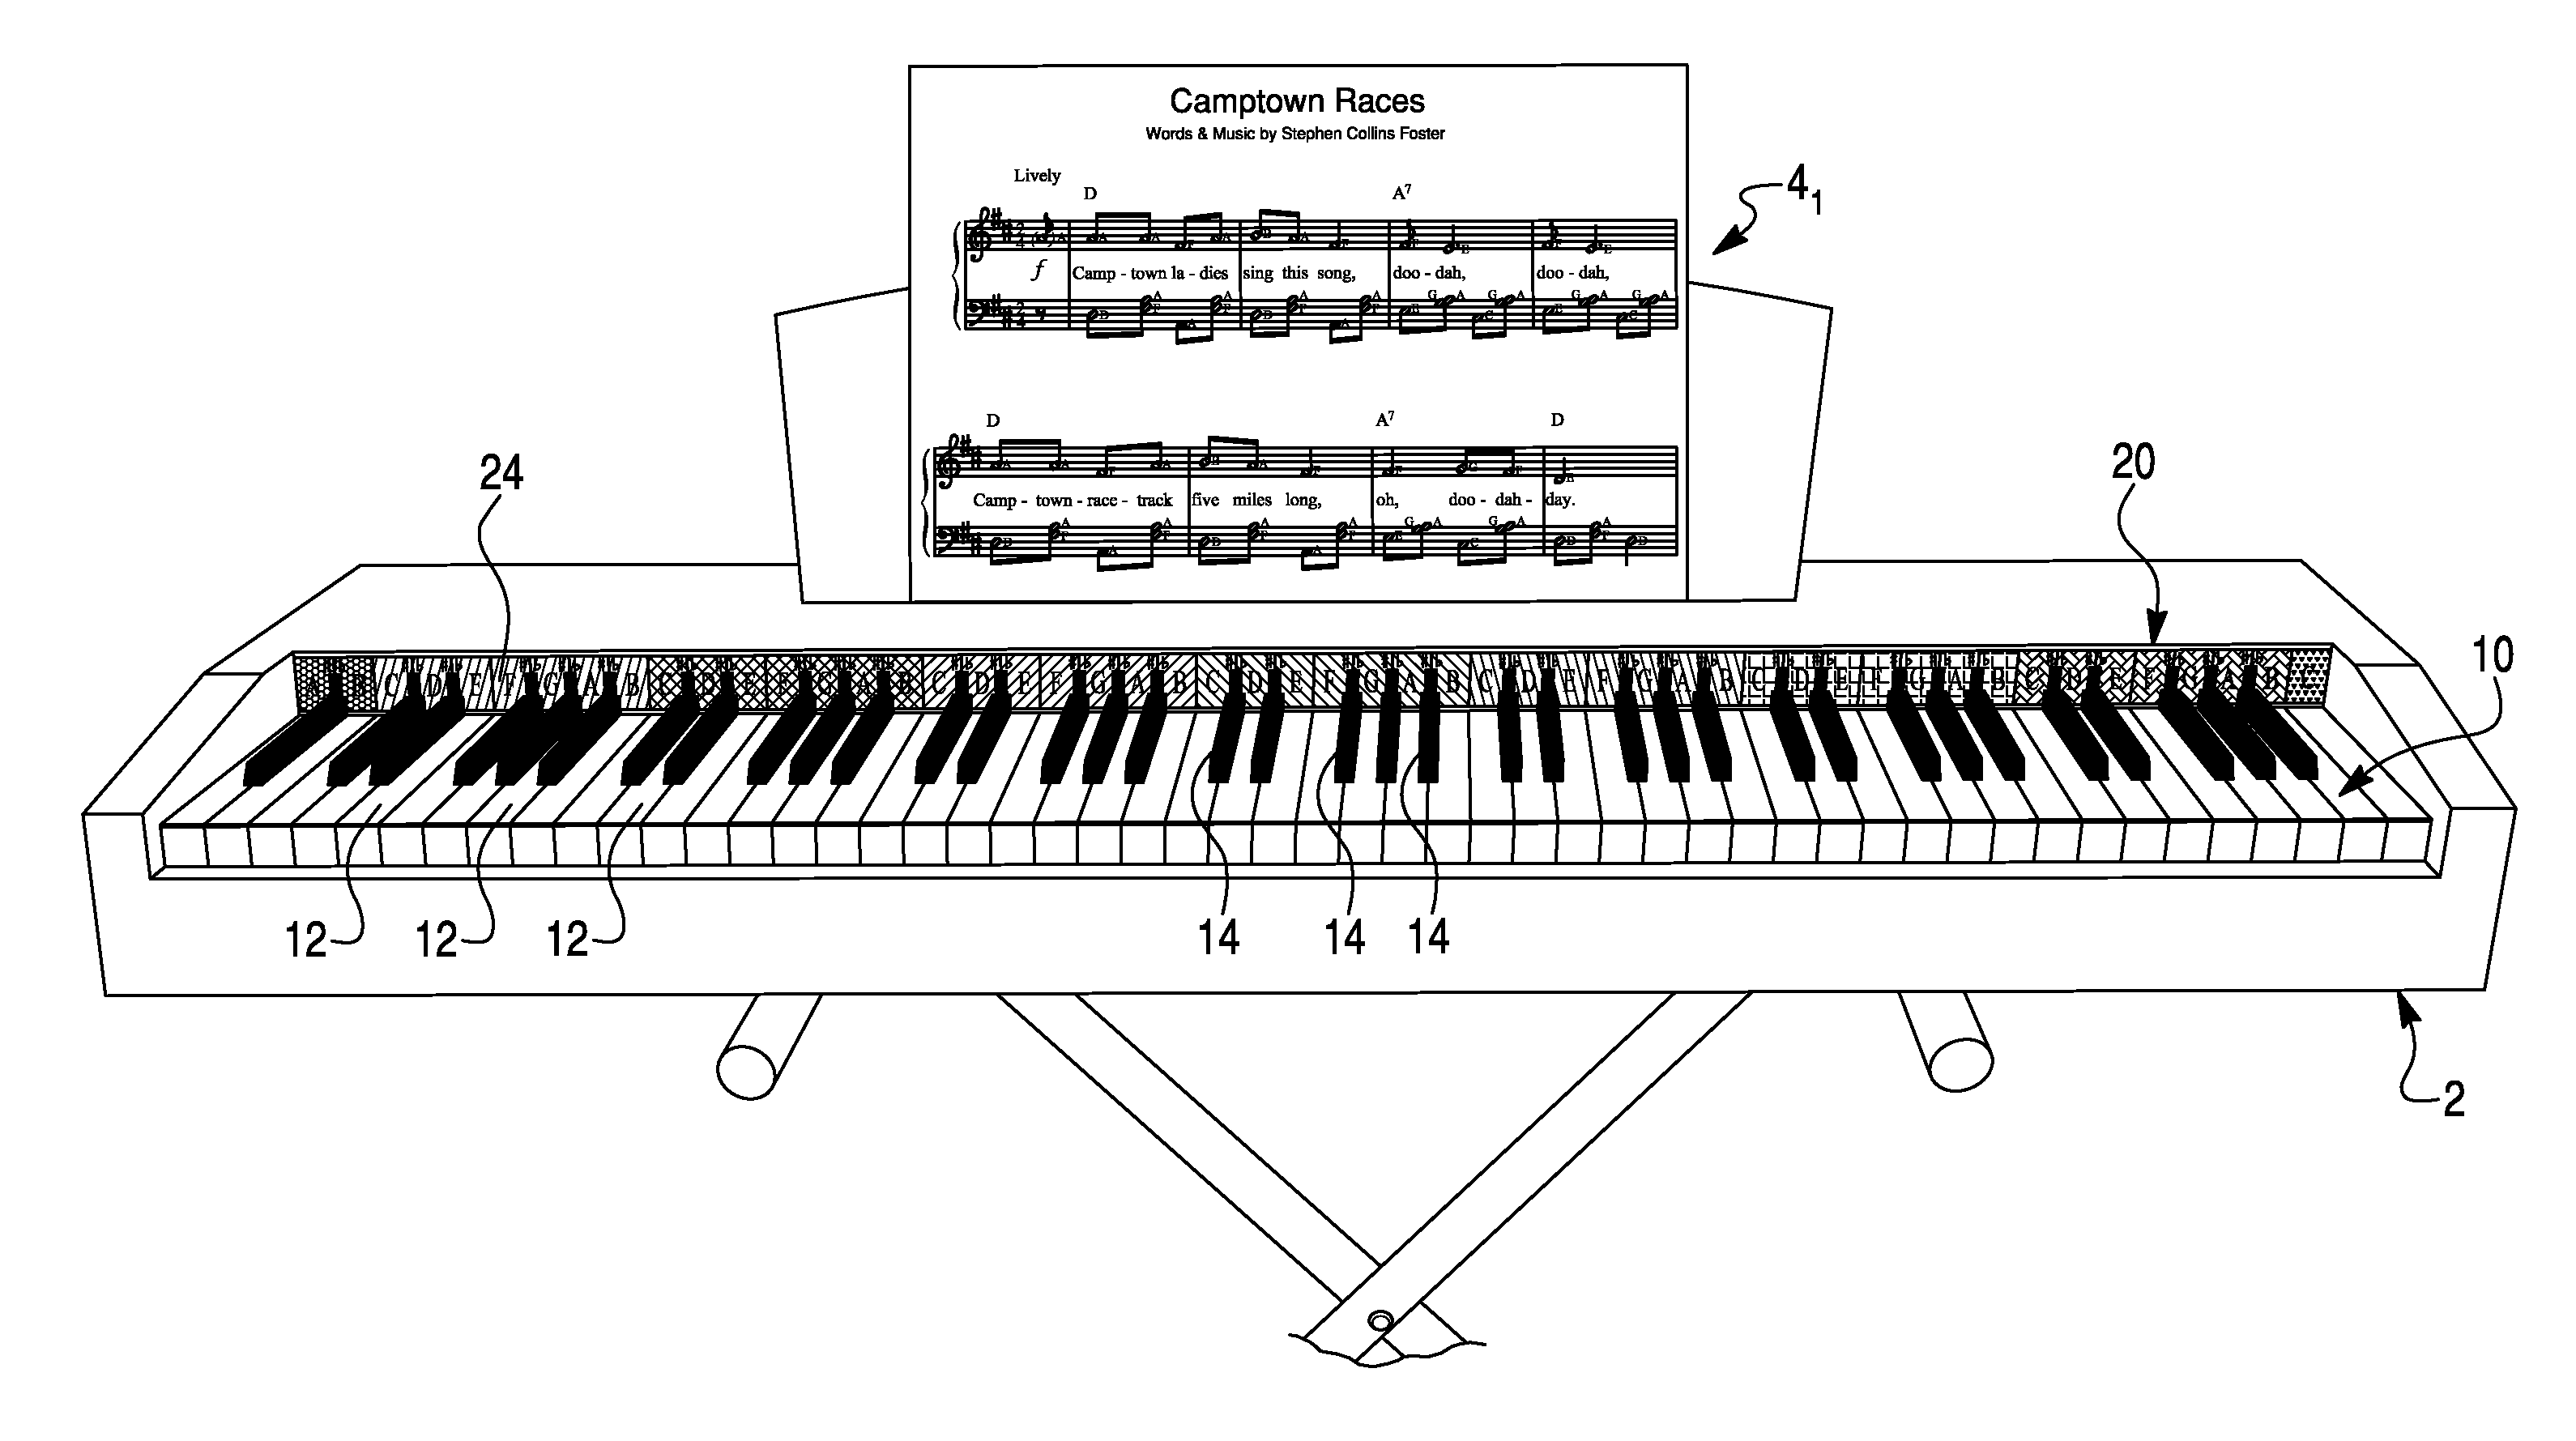 System of associating sheet music notation with keyboard keys and sight reading